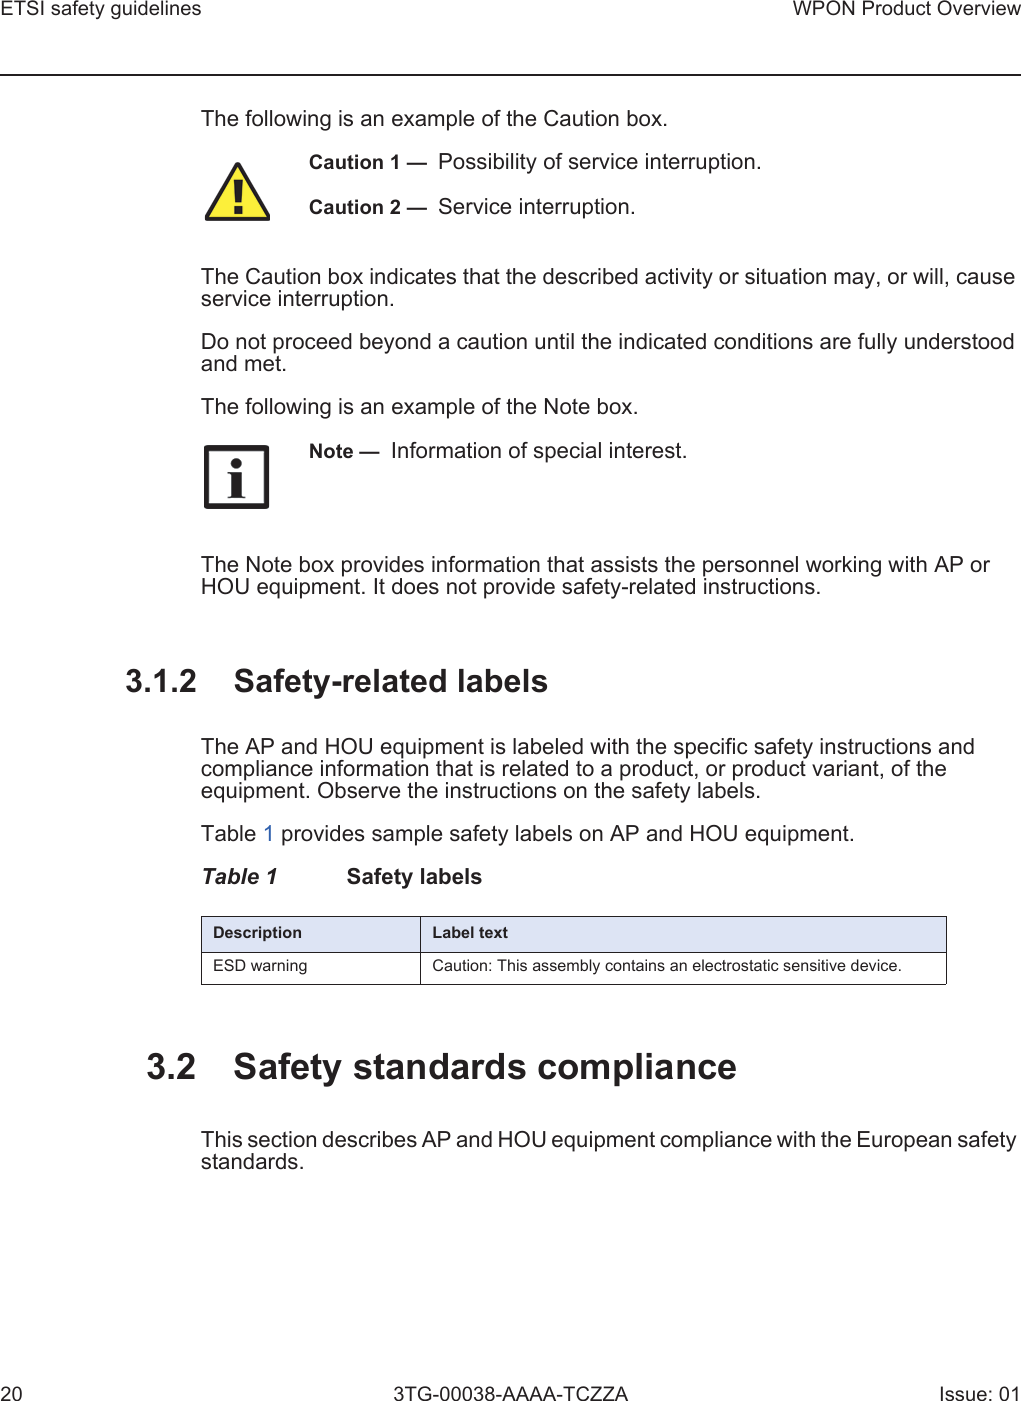 ETSI safety guidelines20WPON Product Overview3TG-00038-AAAA-TCZZA Issue: 01The following is an example of the Caution box.The Caution box indicates that the described activity or situation may, or will, cause service interruption.Do not proceed beyond a caution until the indicated conditions are fully understood and met.The following is an example of the Note box.The Note box provides information that assists the personnel working with AP or HOU equipment. It does not provide safety-related instructions.3.1.2 Safety-related labelsThe AP and HOU equipment is labeled with the specific safety instructions and compliance information that is related to a product, or product variant, of the equipment. Observe the instructions on the safety labels.Table 1 provides sample safety labels on AP and HOU equipment.Table 1 Safety labels3.2 Safety standards complianceThis section describes AP and HOU equipment compliance with the European safety standards.Caution 1 —  Possibility of service interruption.Caution 2 —  Service interruption.Note —  Information of special interest.Description Label textESD warning Caution: This assembly contains an electrostatic sensitive device.